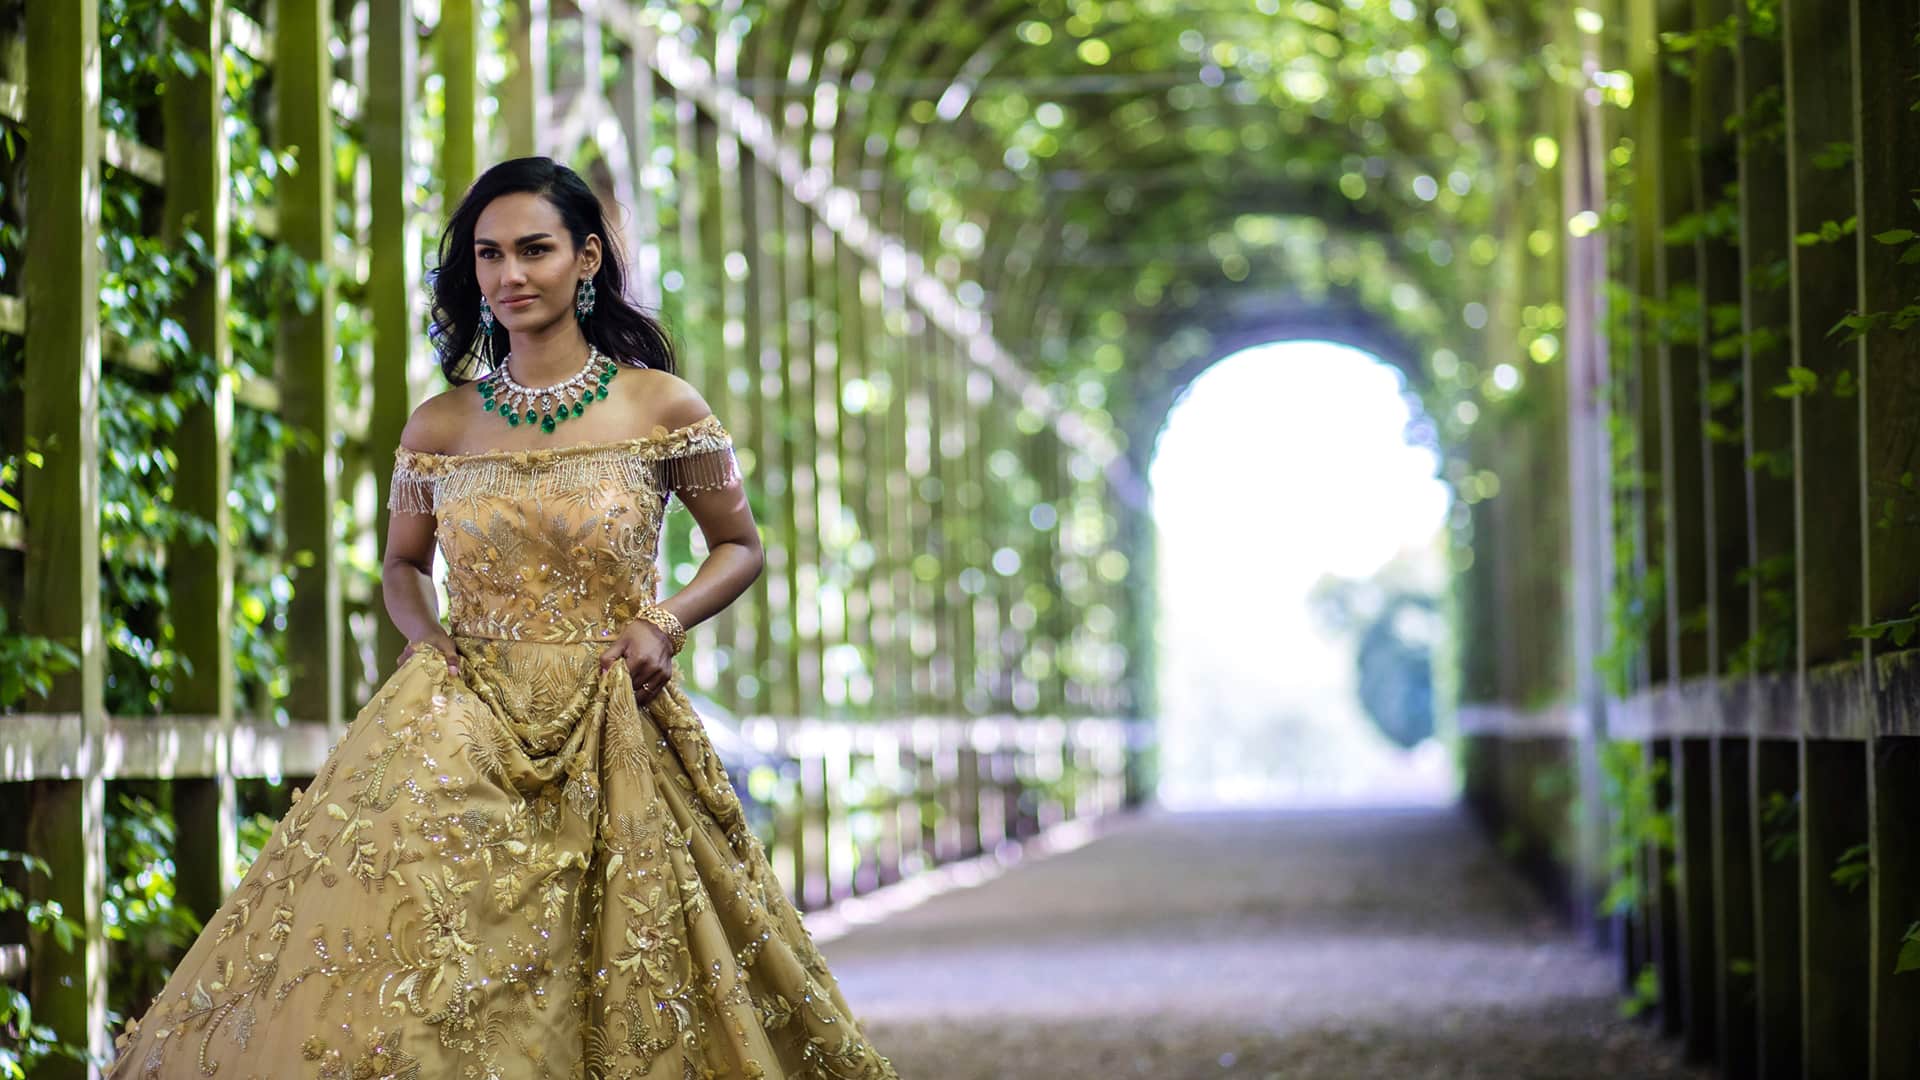 Asian Wedding Photoshoot in the Garden, walkway on the south front, Queen Mary's Bower. Back lit bride wearing gold.